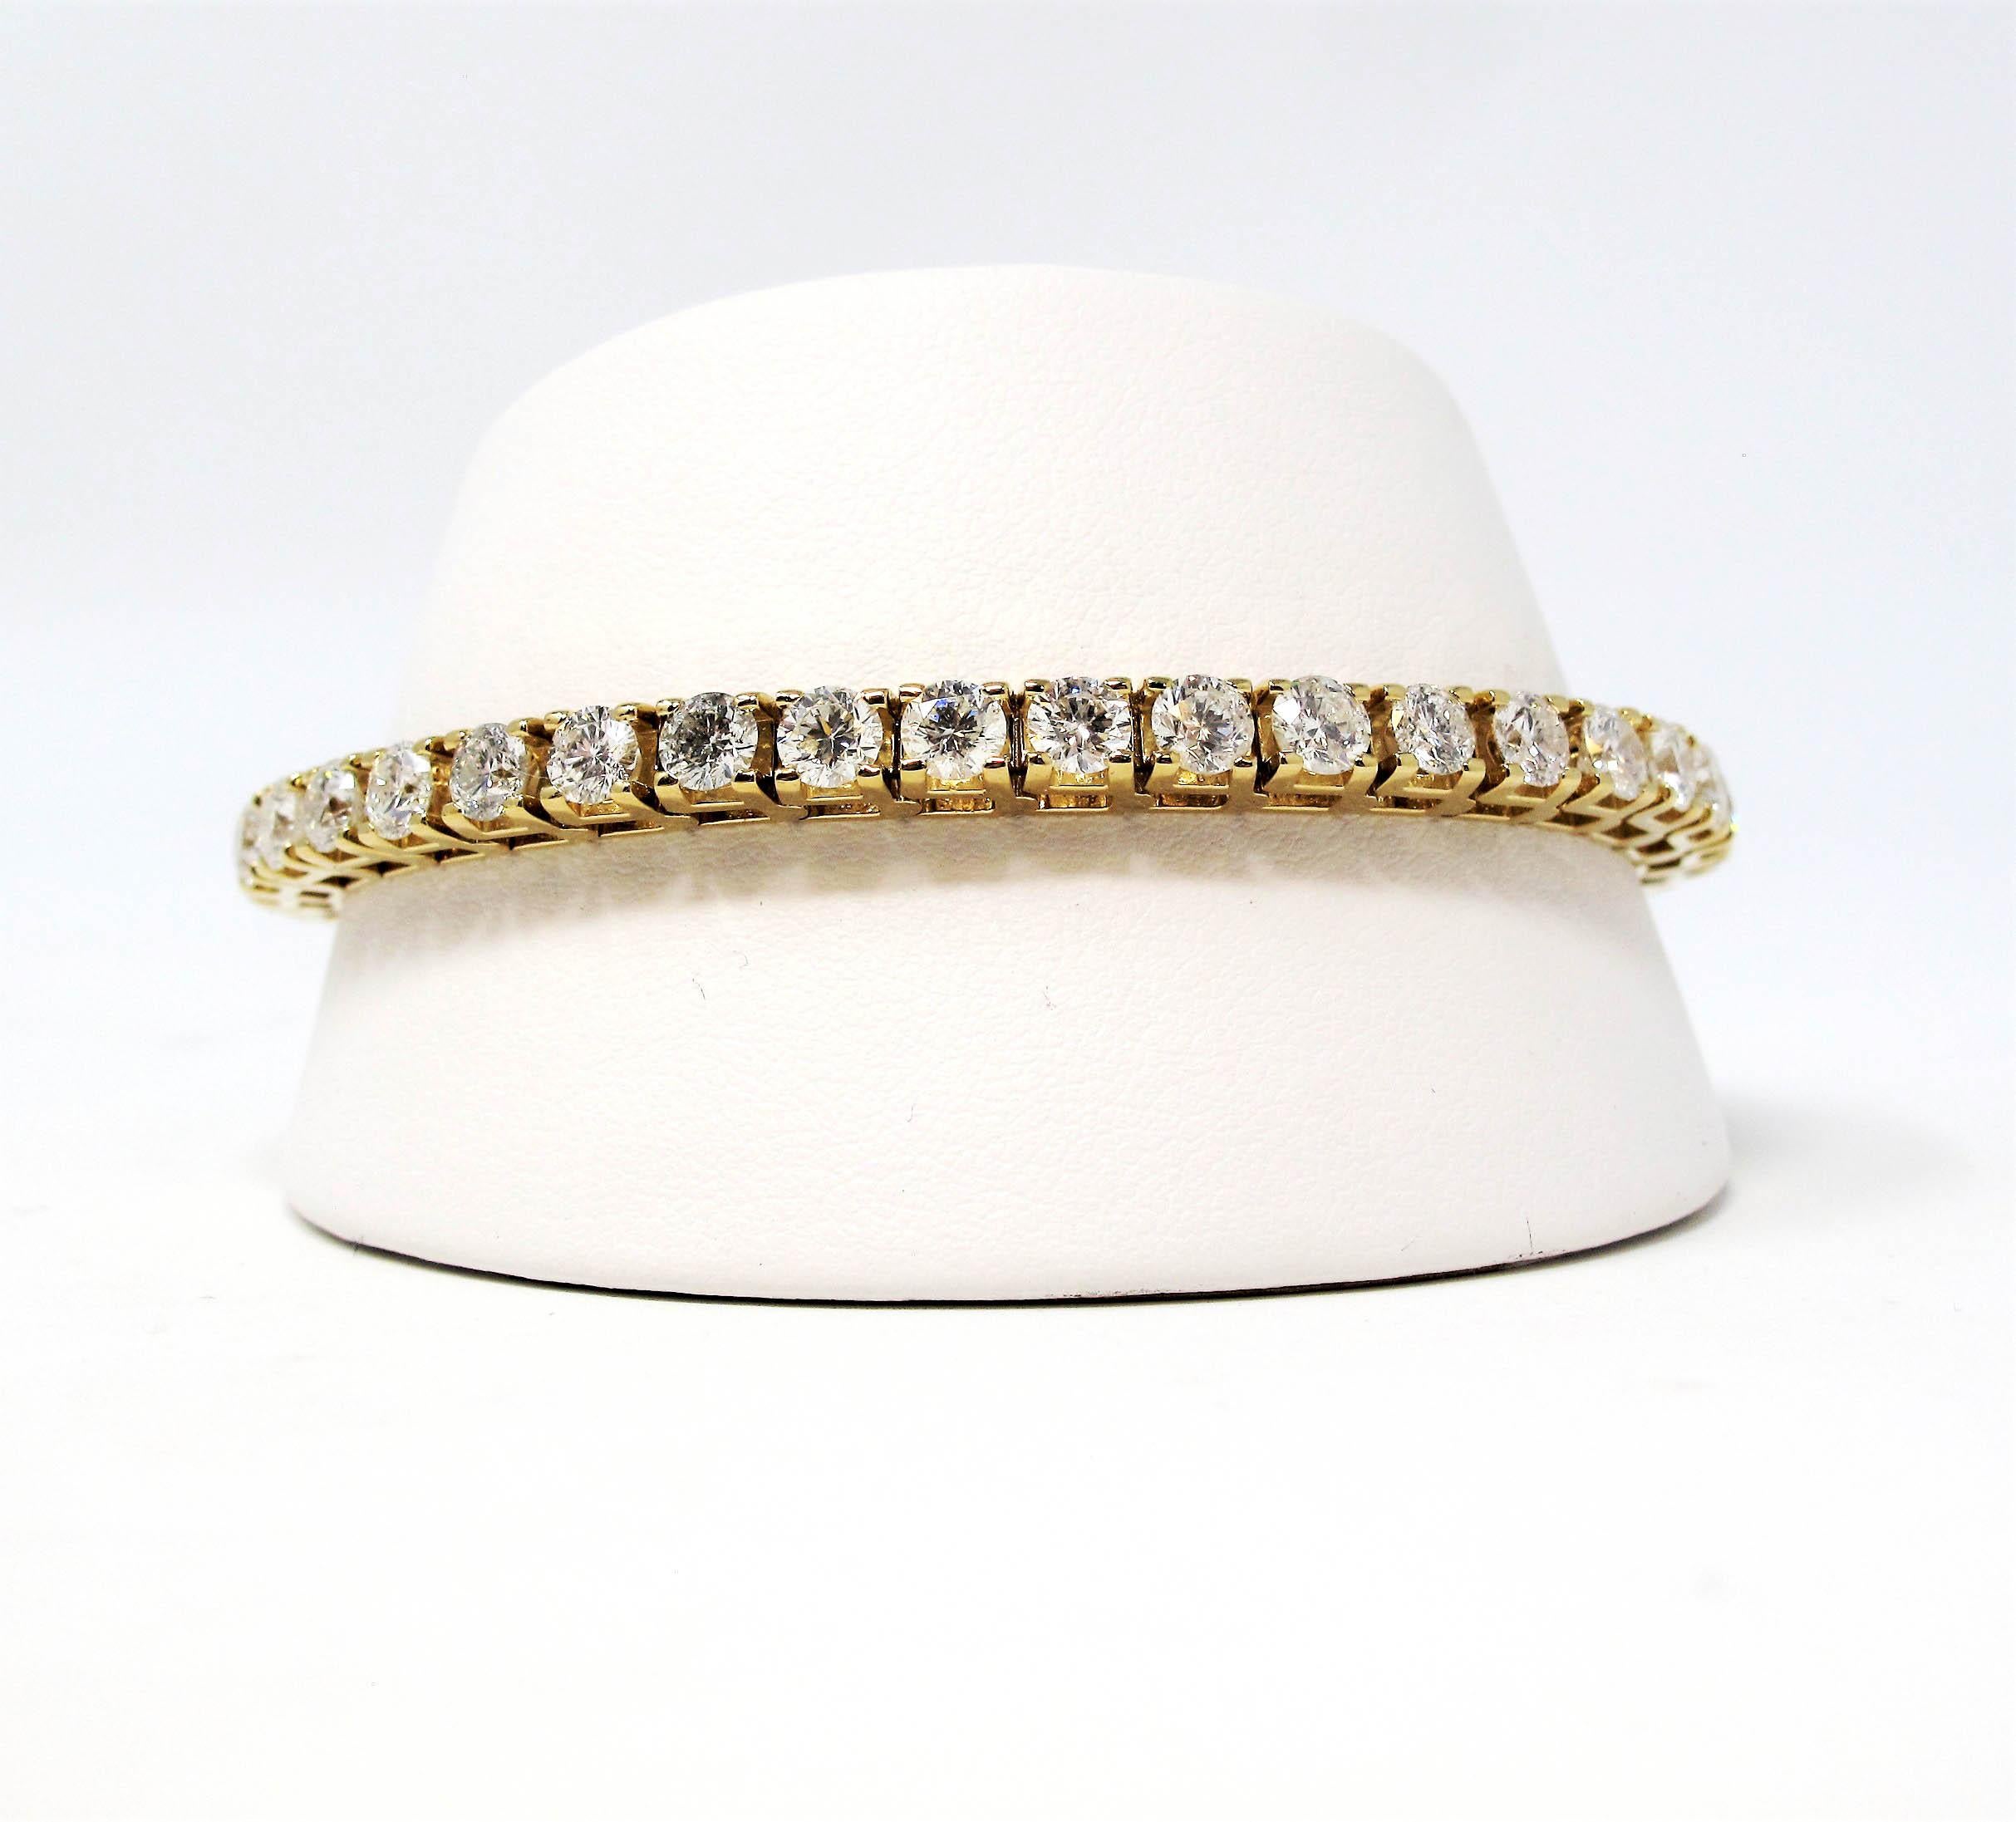 This is an absolutely stunning diamond tennis bracelet that will stand the test of time. The elegant yellow gold setting paired with the timeless round diamonds makes this piece a true classic that will never go out of style. 
   
This gorgeous